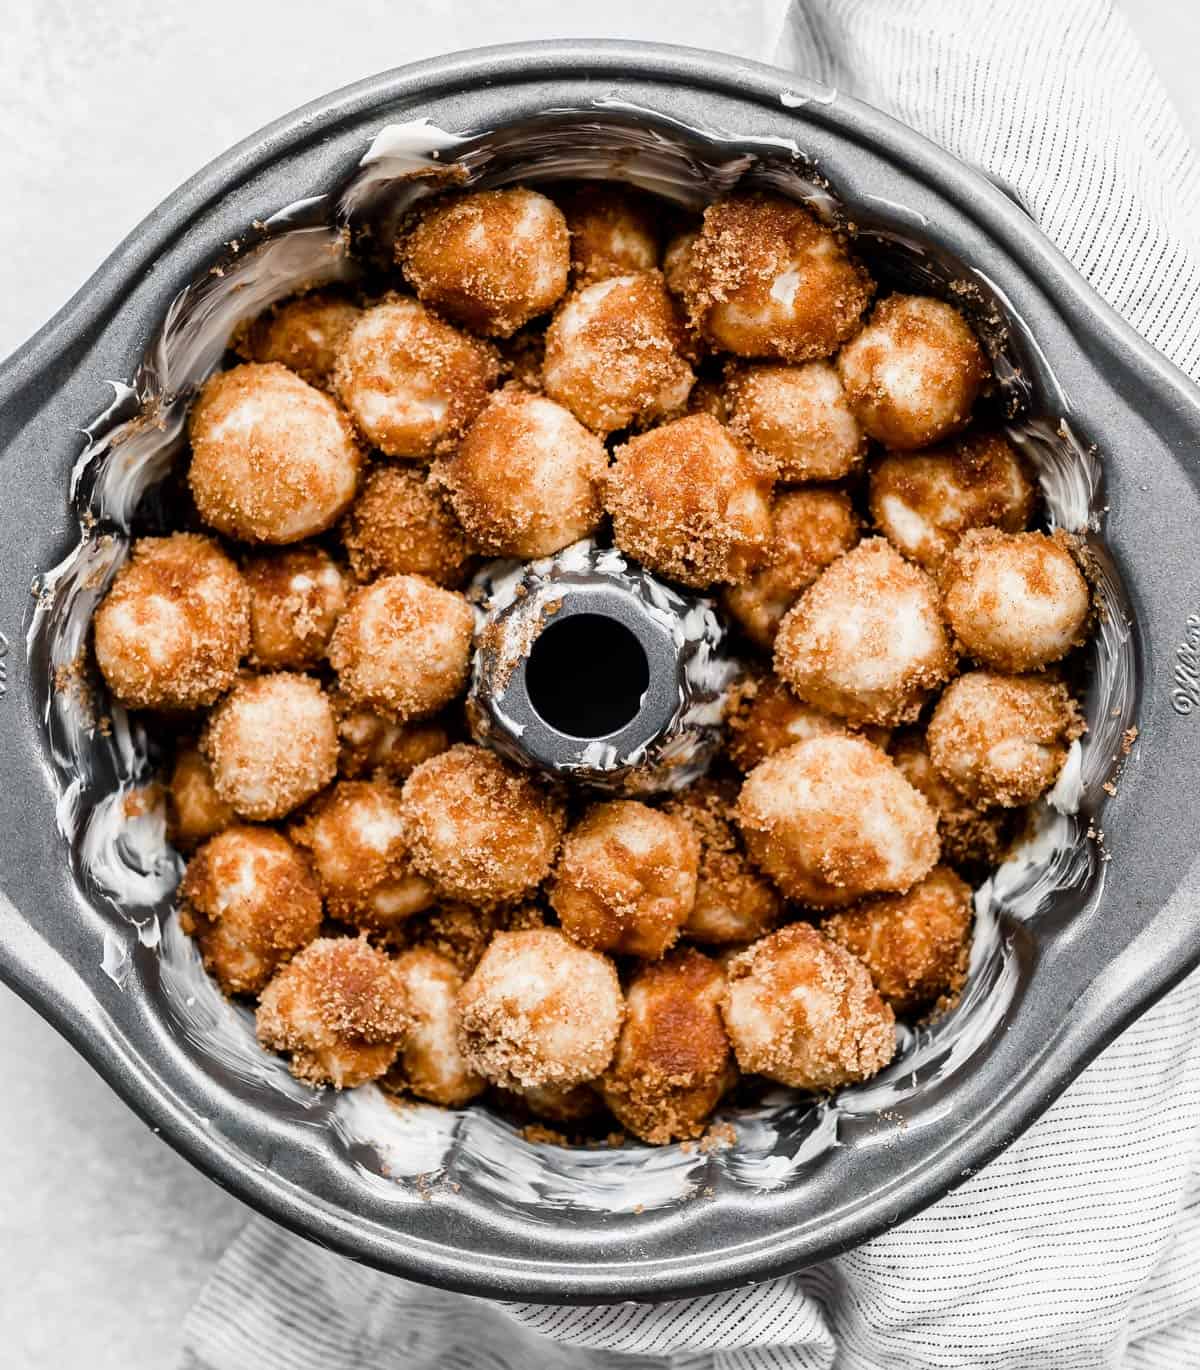 A bundt pan with cinnamon sugar coated dough balls for making The Best Monkey Bread Recipe.